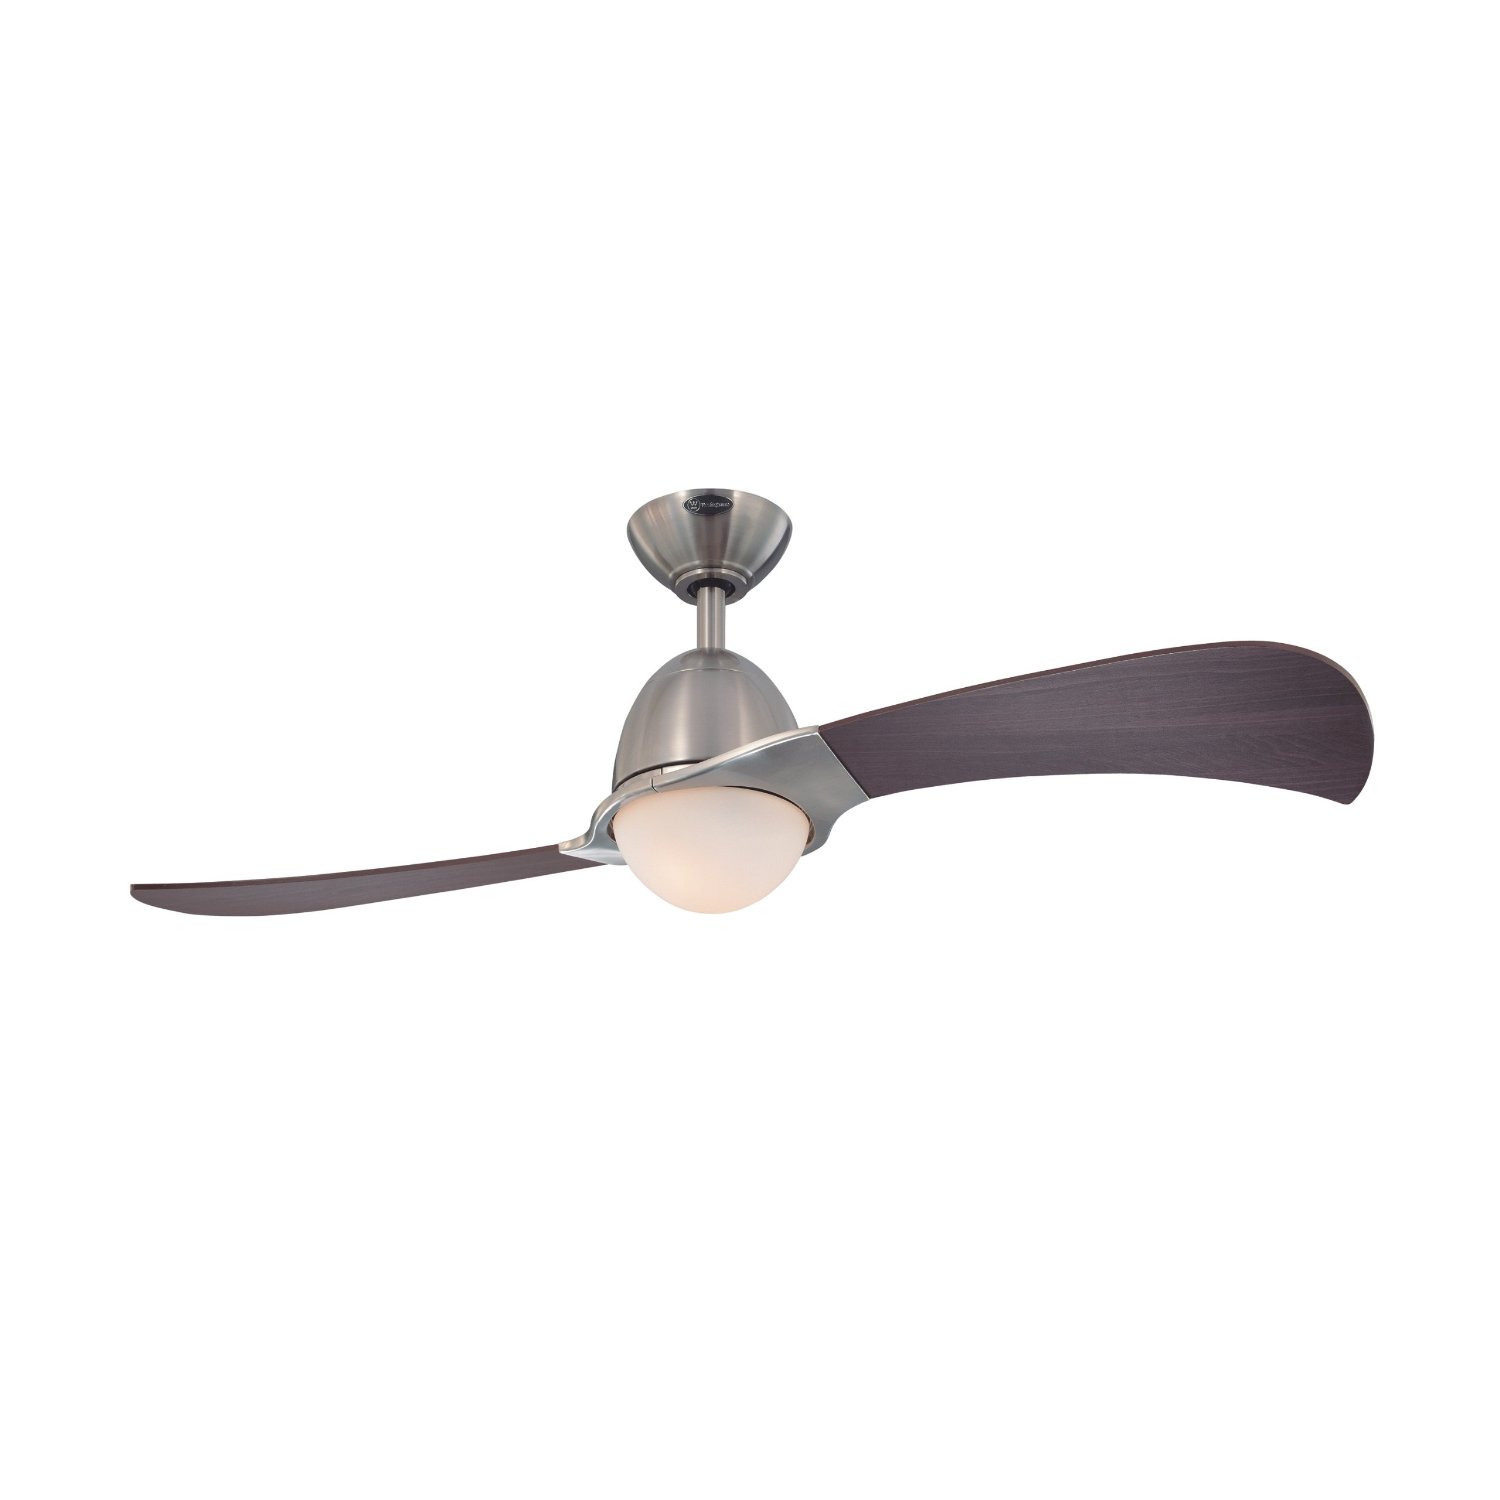 Westinghouse Lighting 7216100 Solana is an indoor ceiling fan with ...